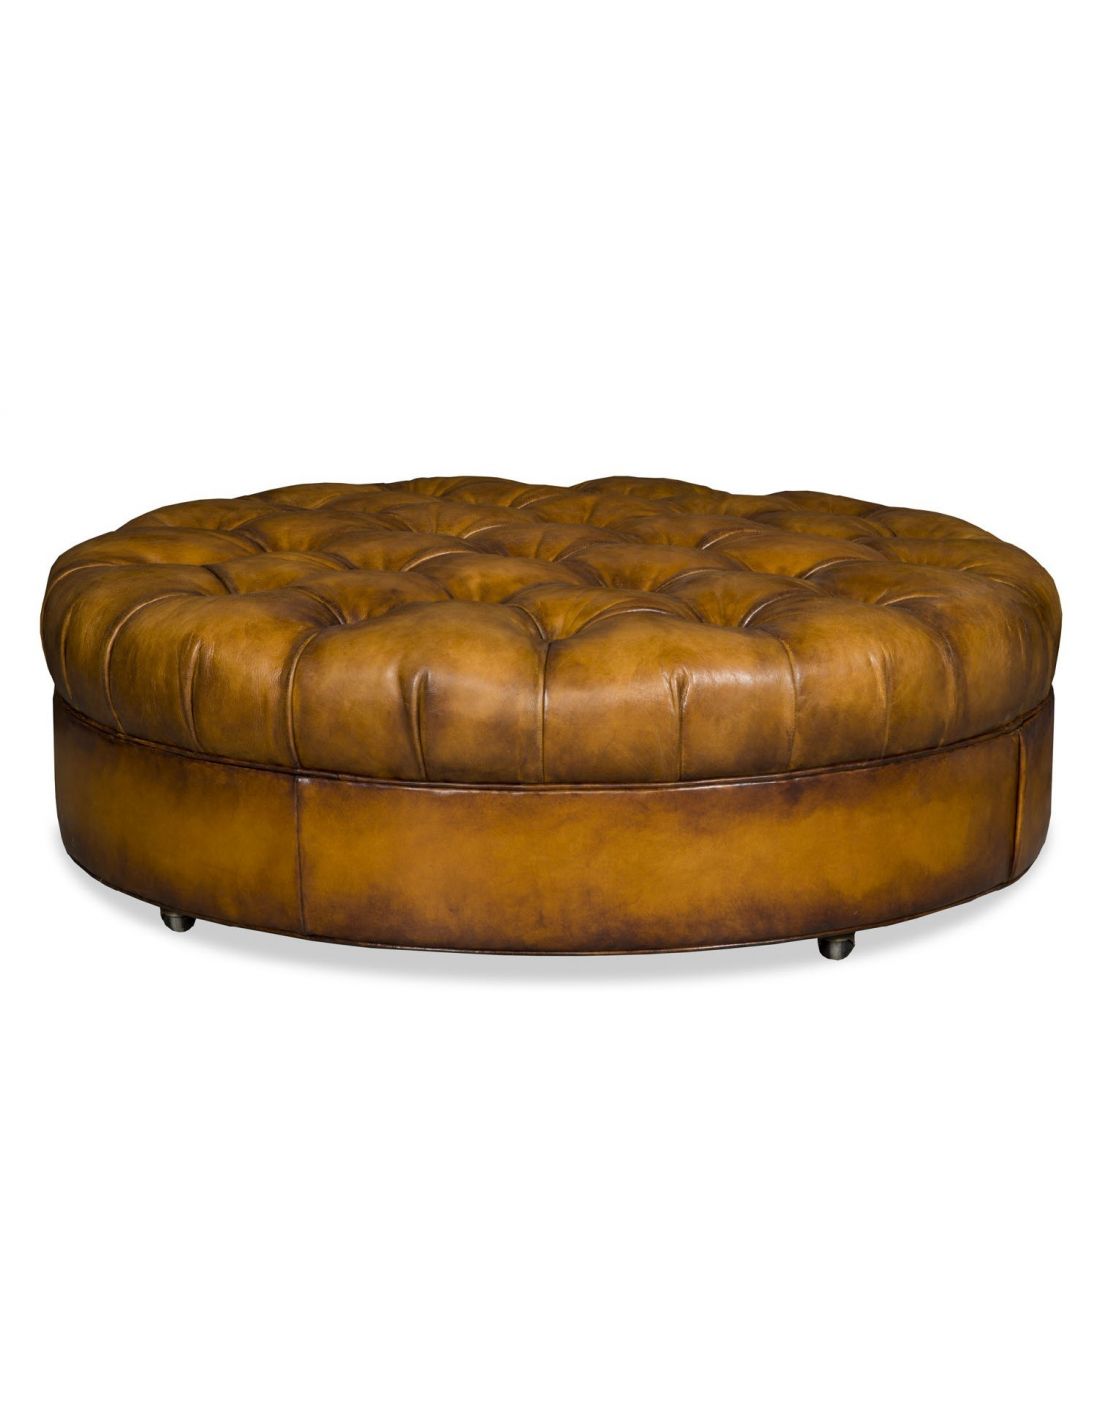 Round Leather Tufted Ottoman, Round Leather Ottoman Chair